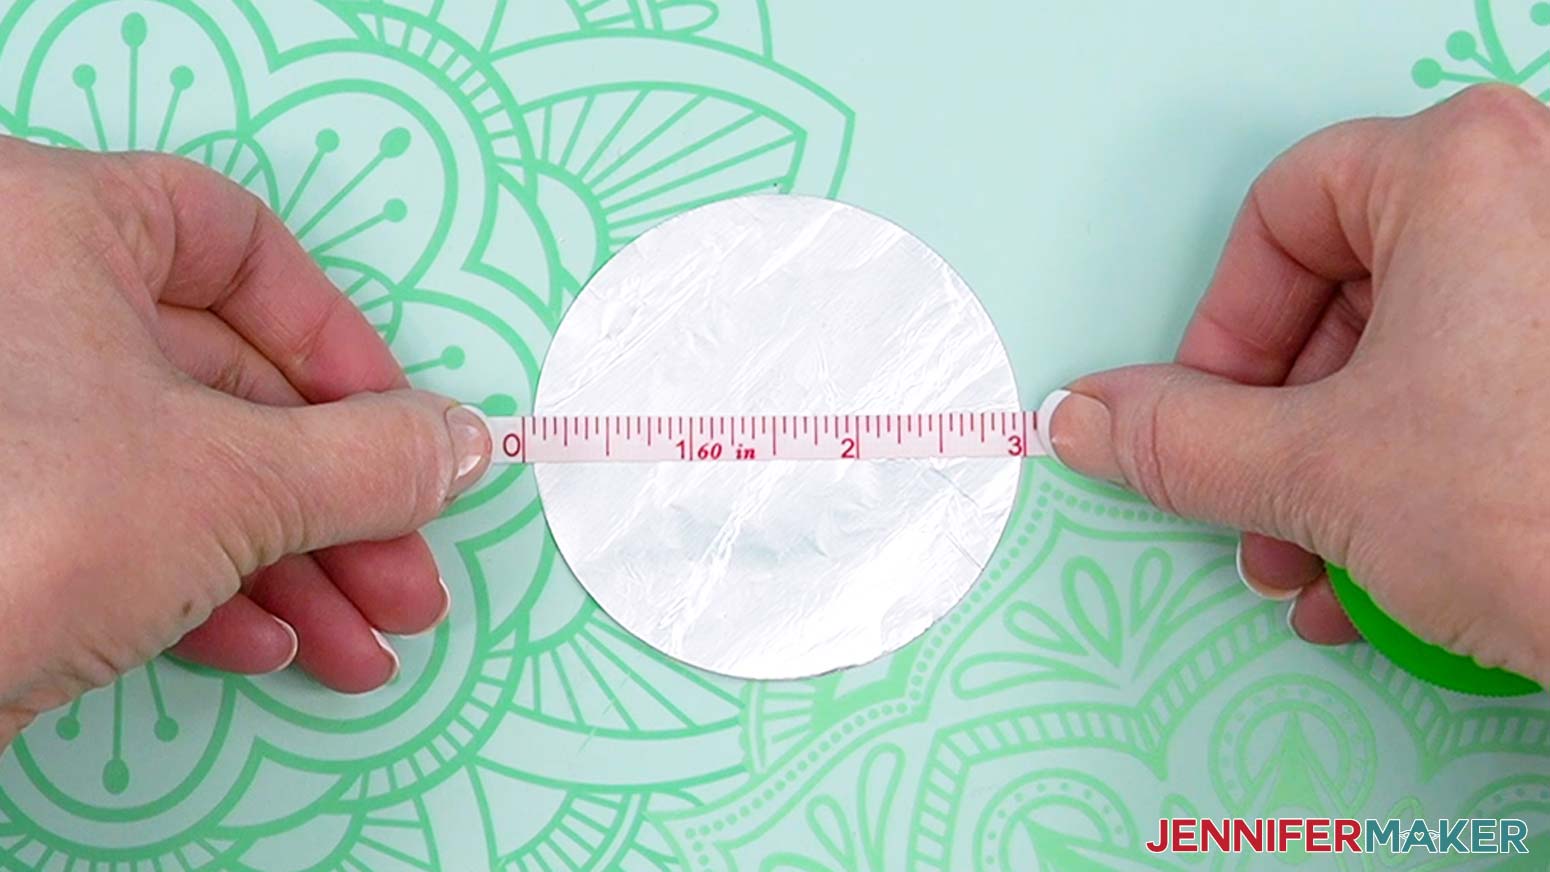 Use a tape measure to cut a 3" foil circle if cutting by hand.